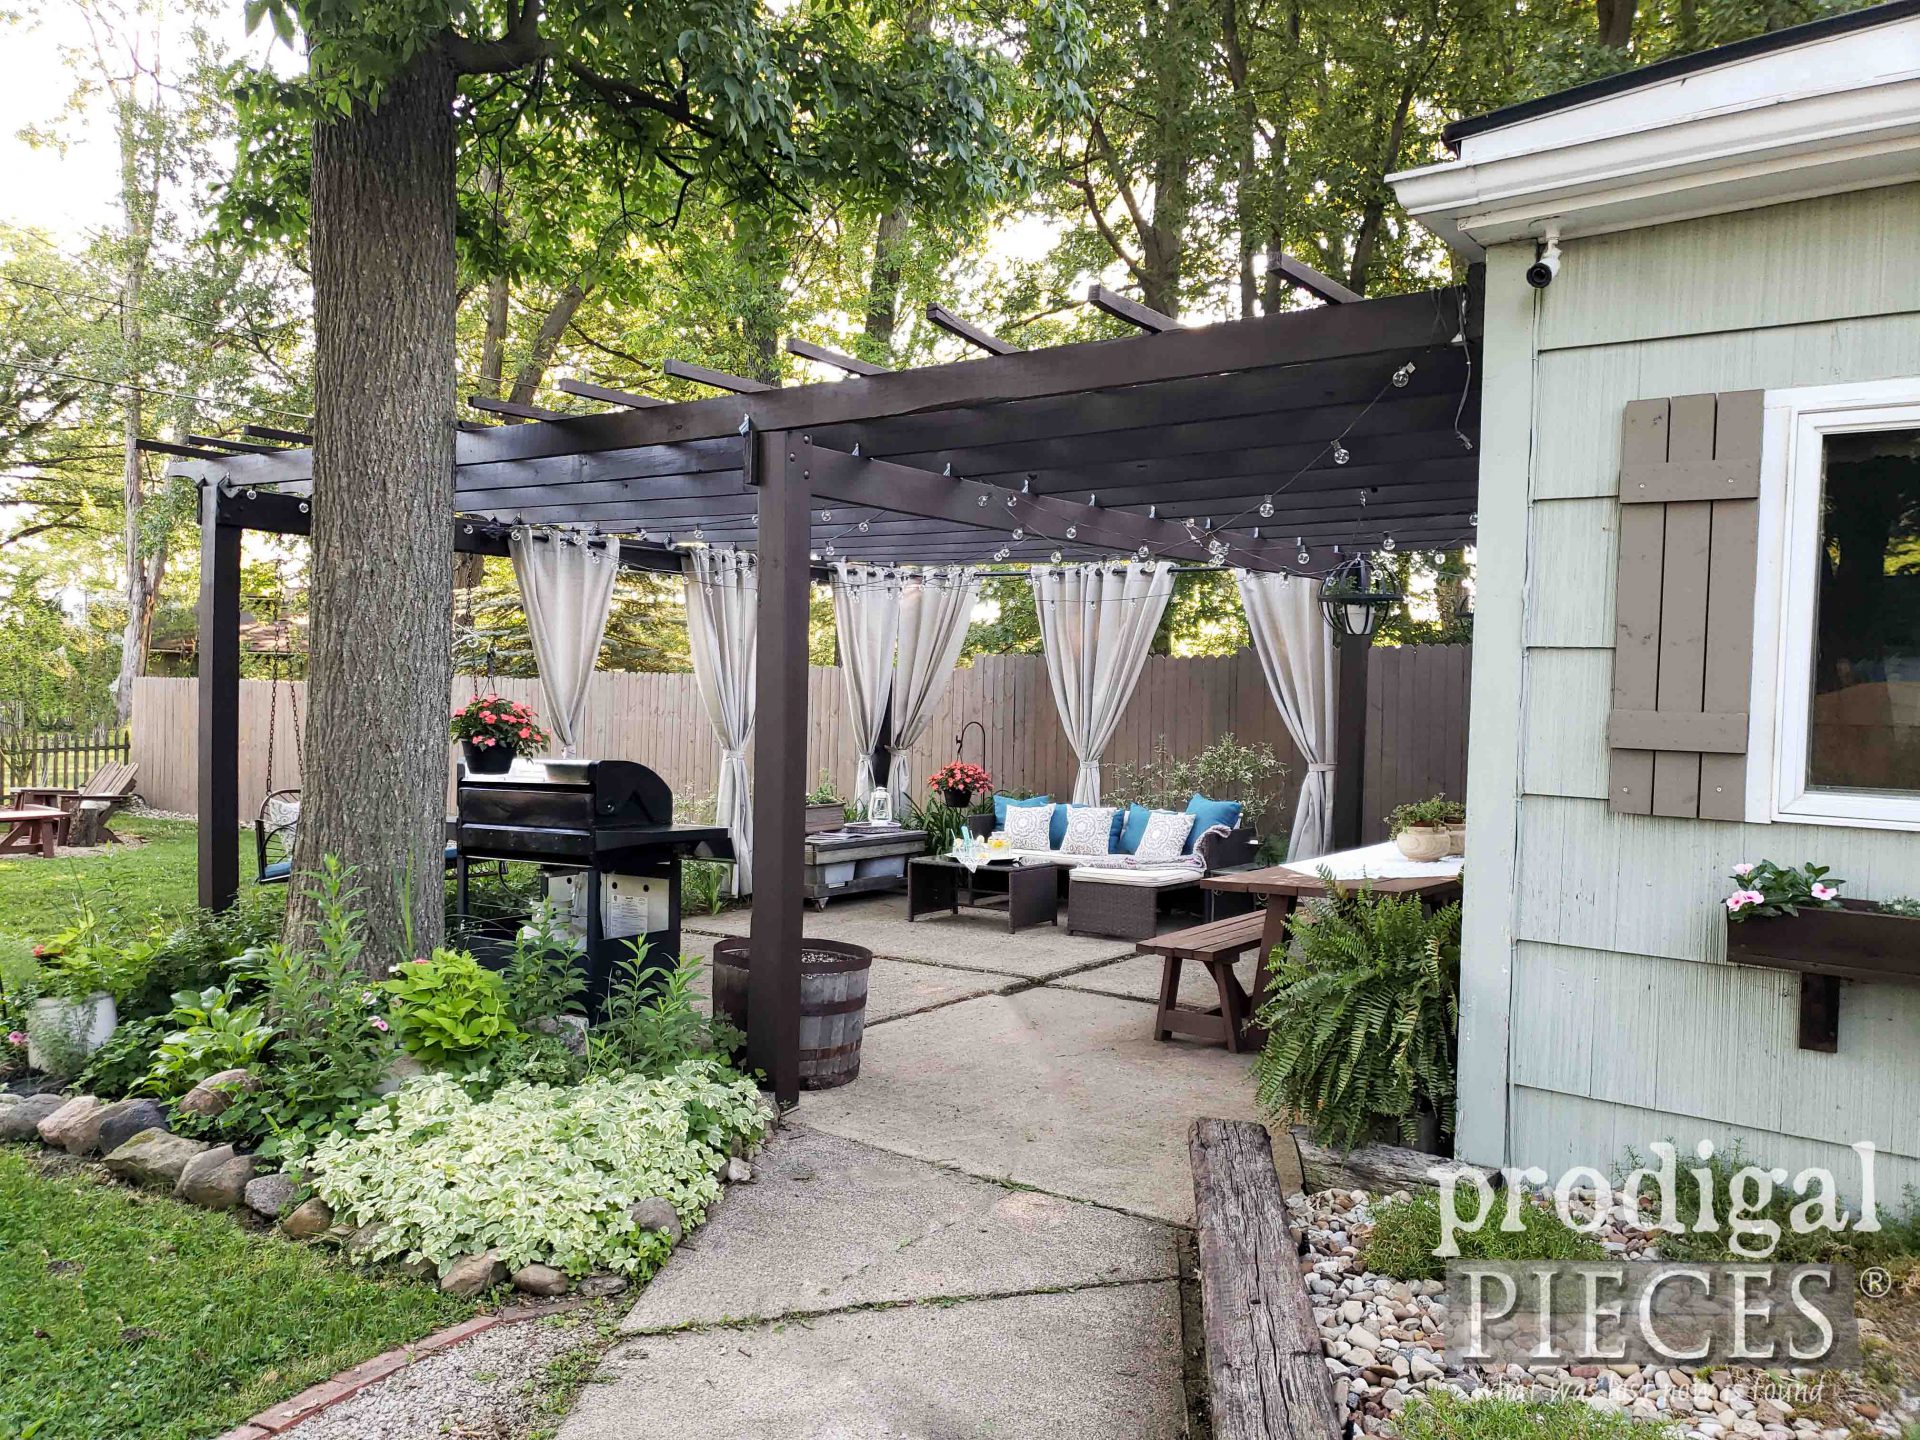 DIY Patio Refresh with Cleaning and Updating Stain by Prodigal Pieces | prodigalpieces.com #prodigalpieces #patio #diy #home #backyard #outdoor